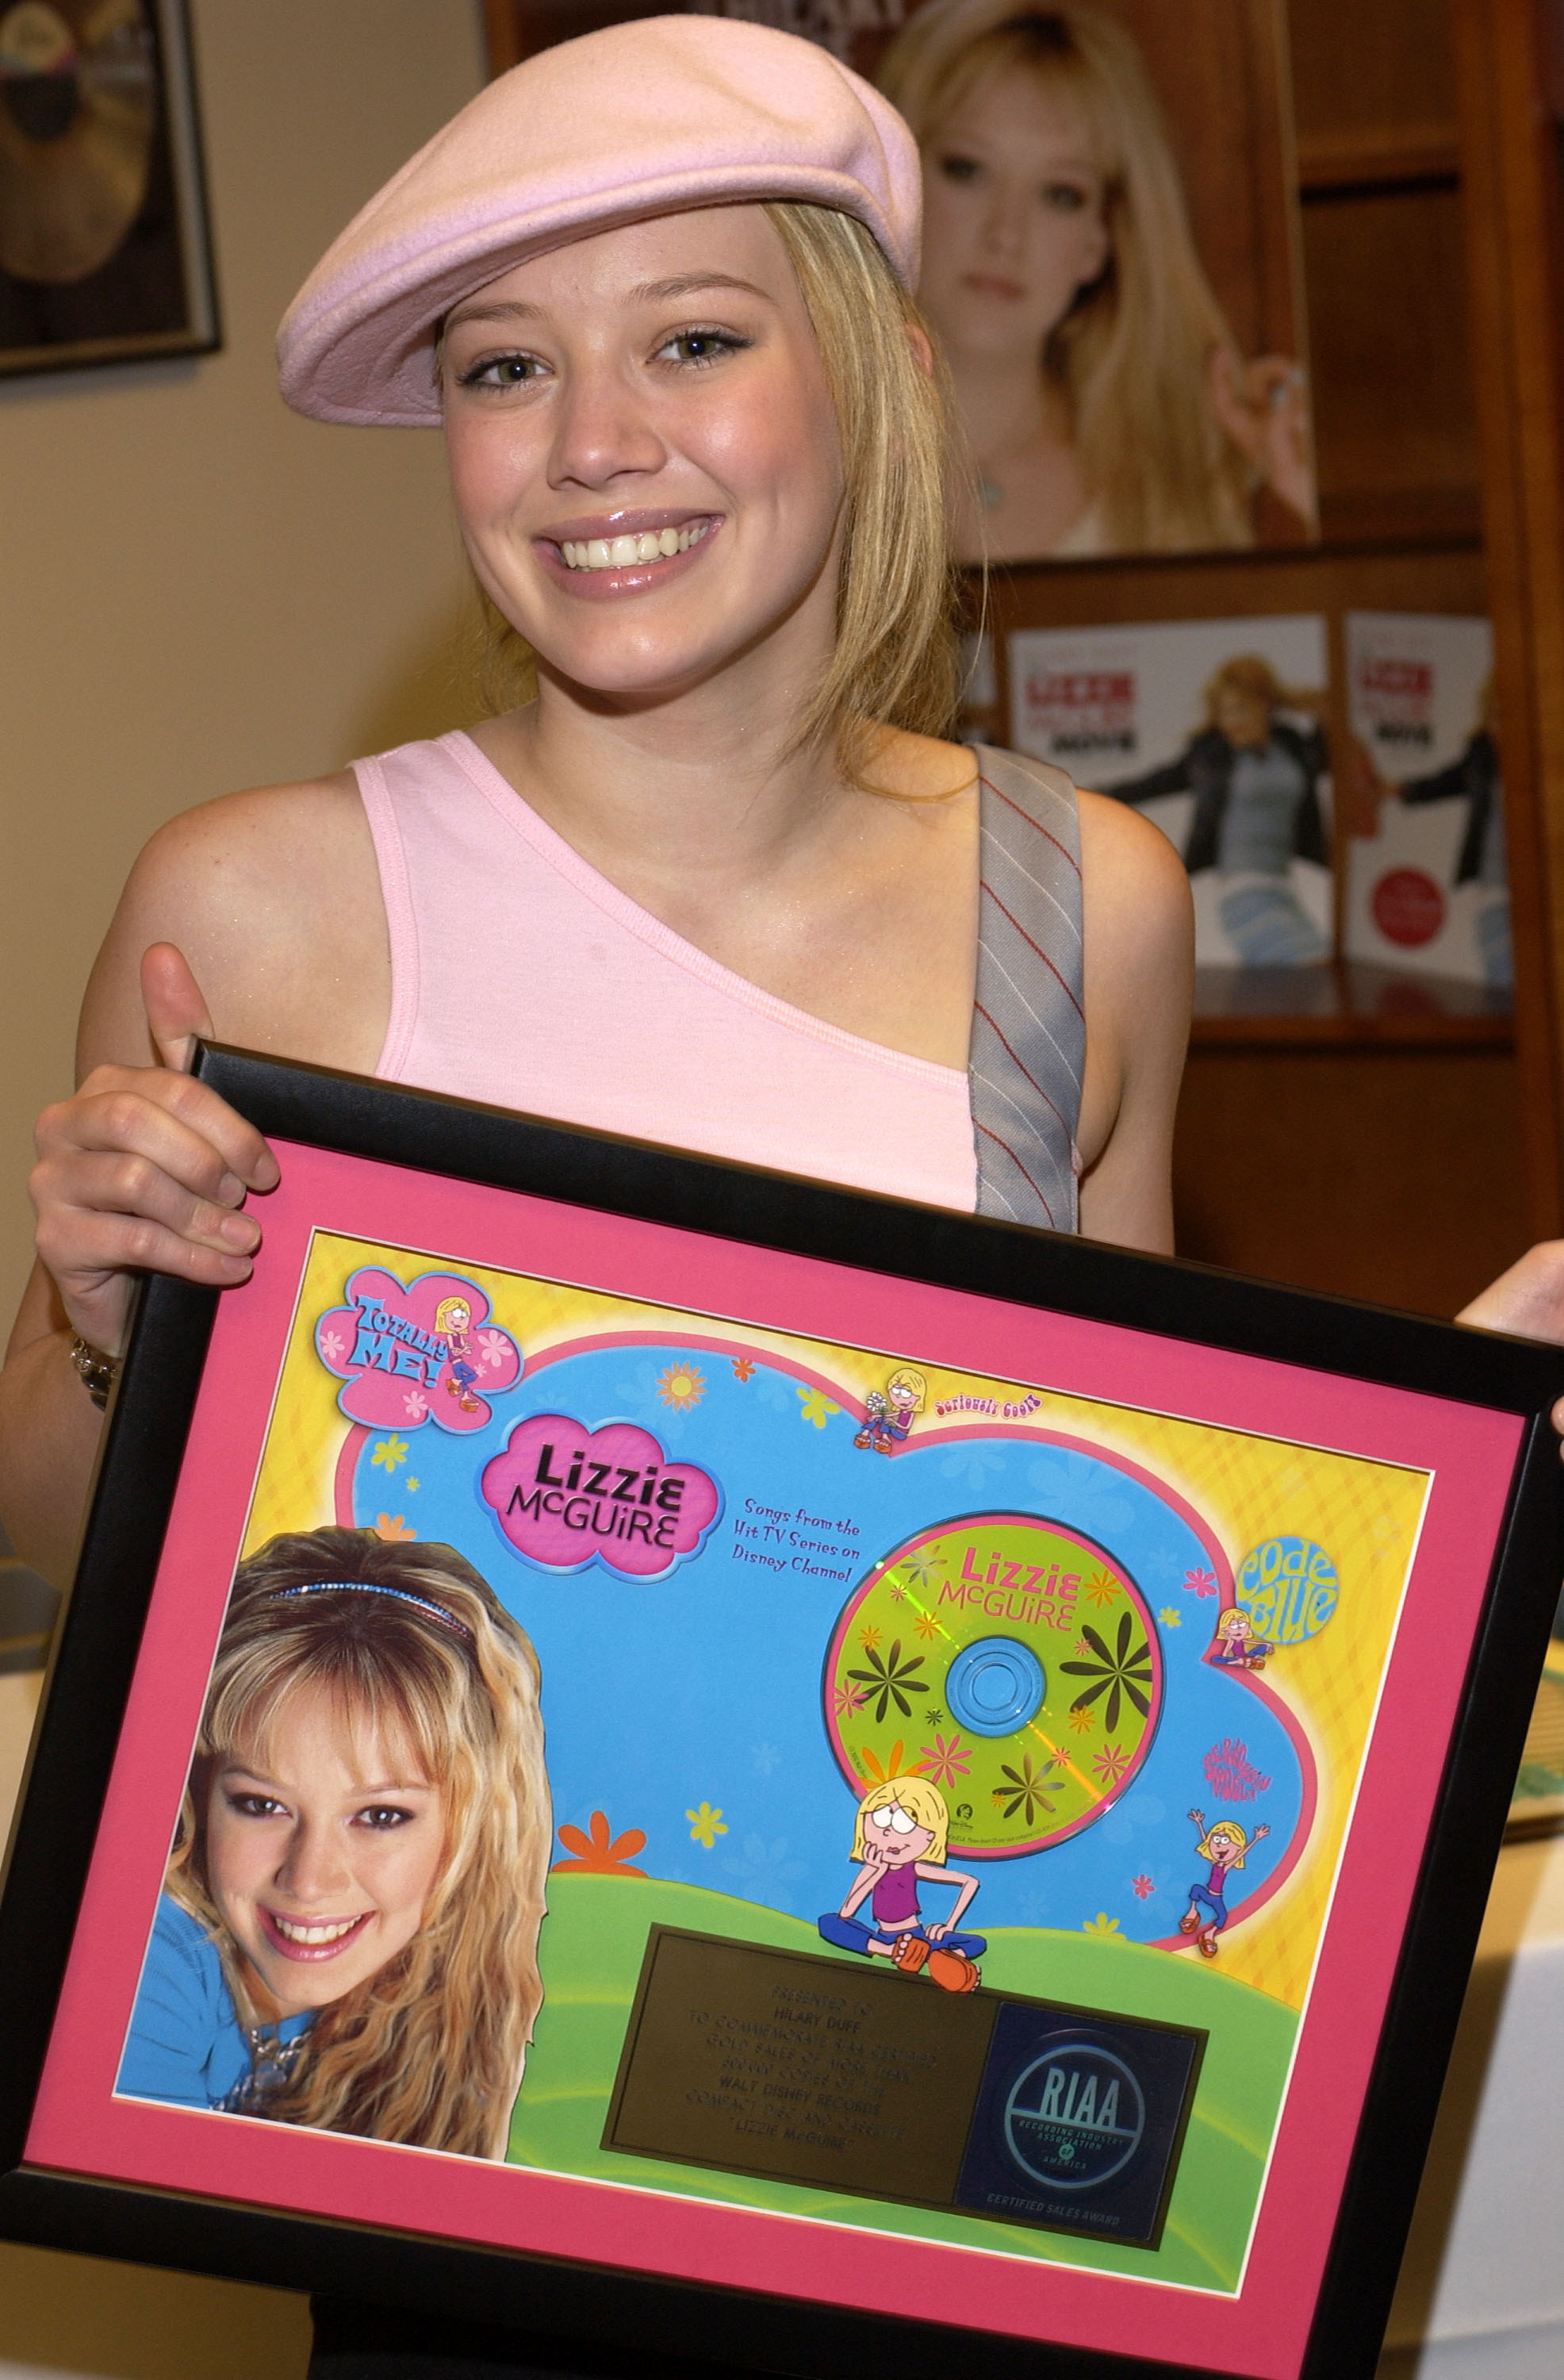 Hilary holding a framed CD of Lizzie McGuire songs